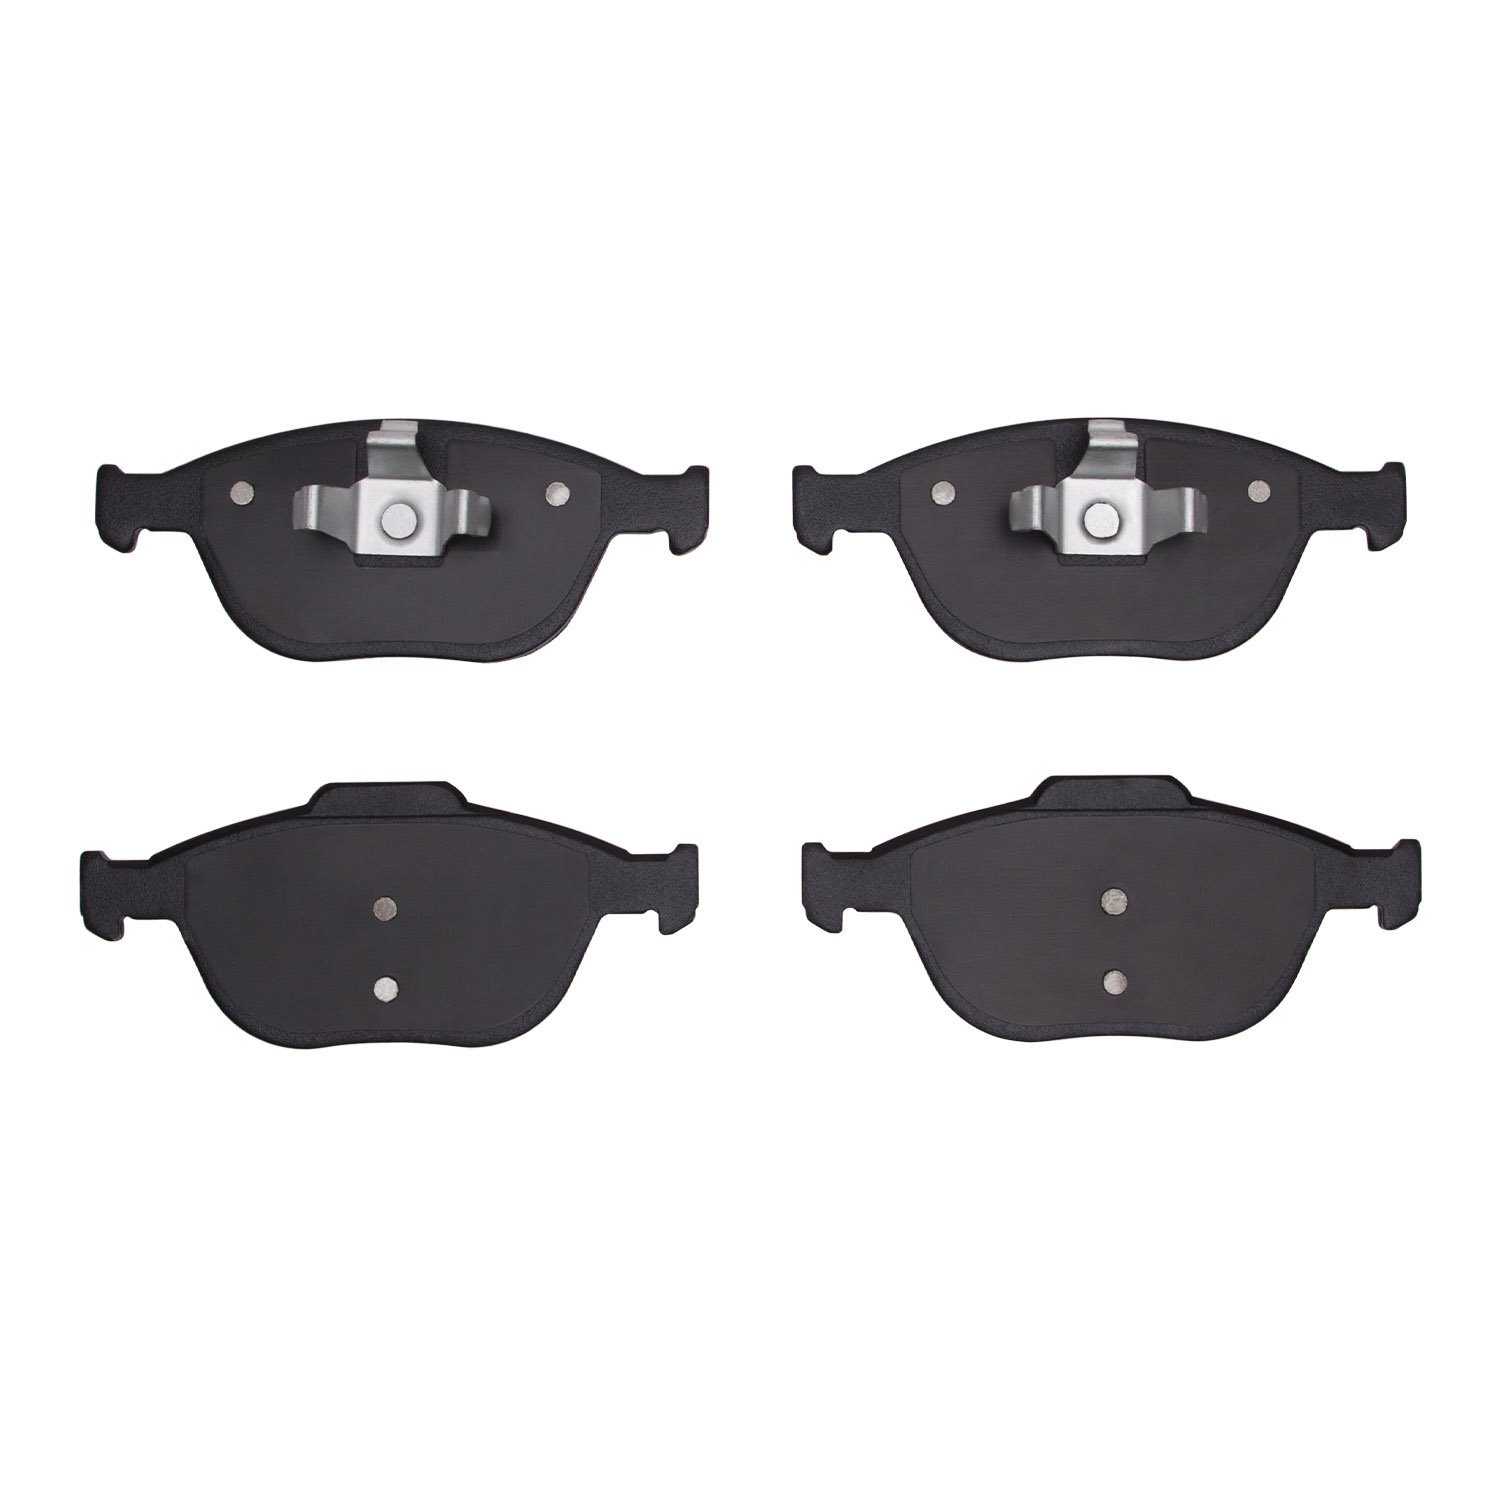 1310-0970-00 3000-Series Ceramic Brake Pads, 2002-2013 Ford/Lincoln/Mercury/Mazda, Position: Front